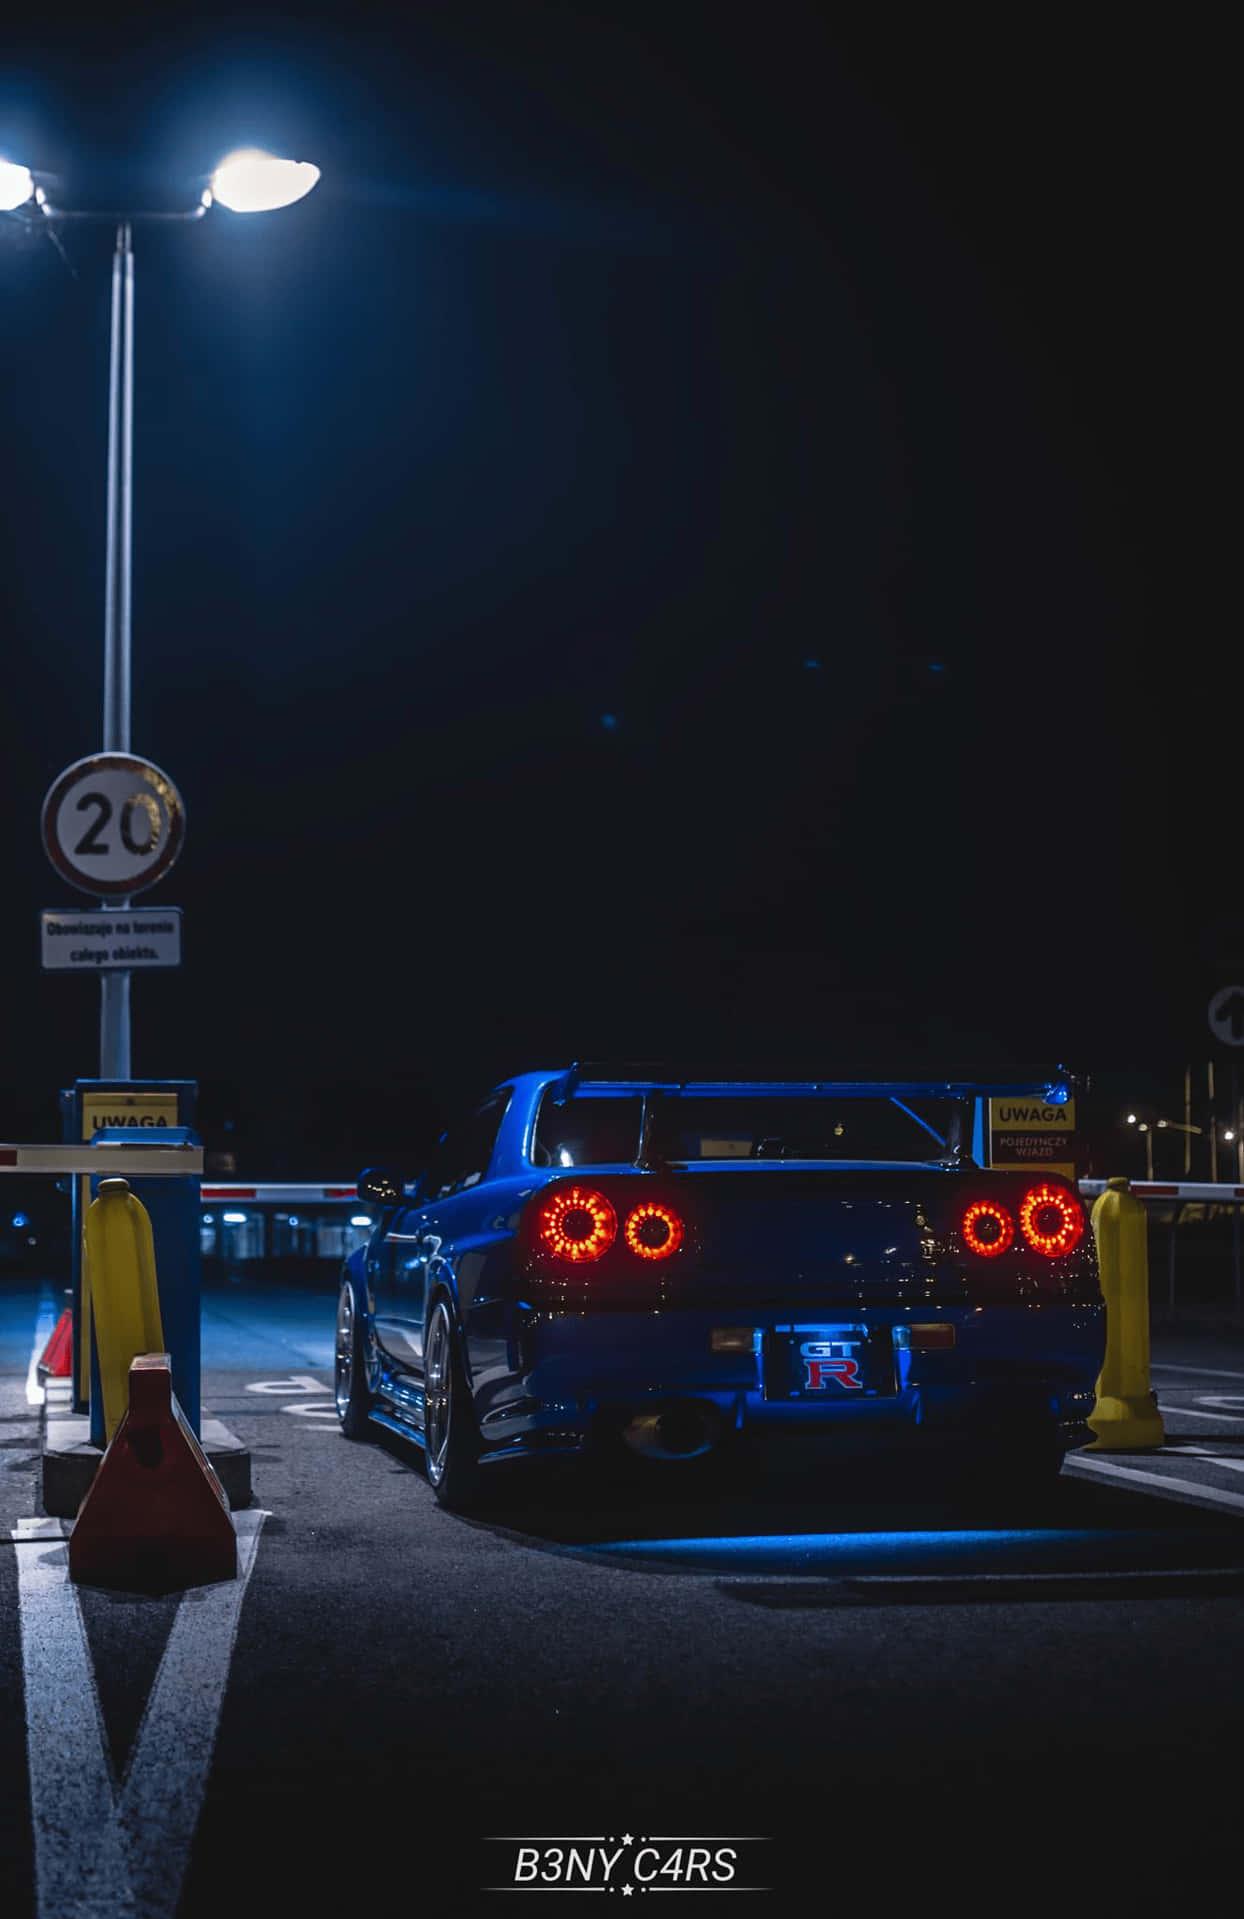 A Blue Sports Car Parked In Parking Lot At Night